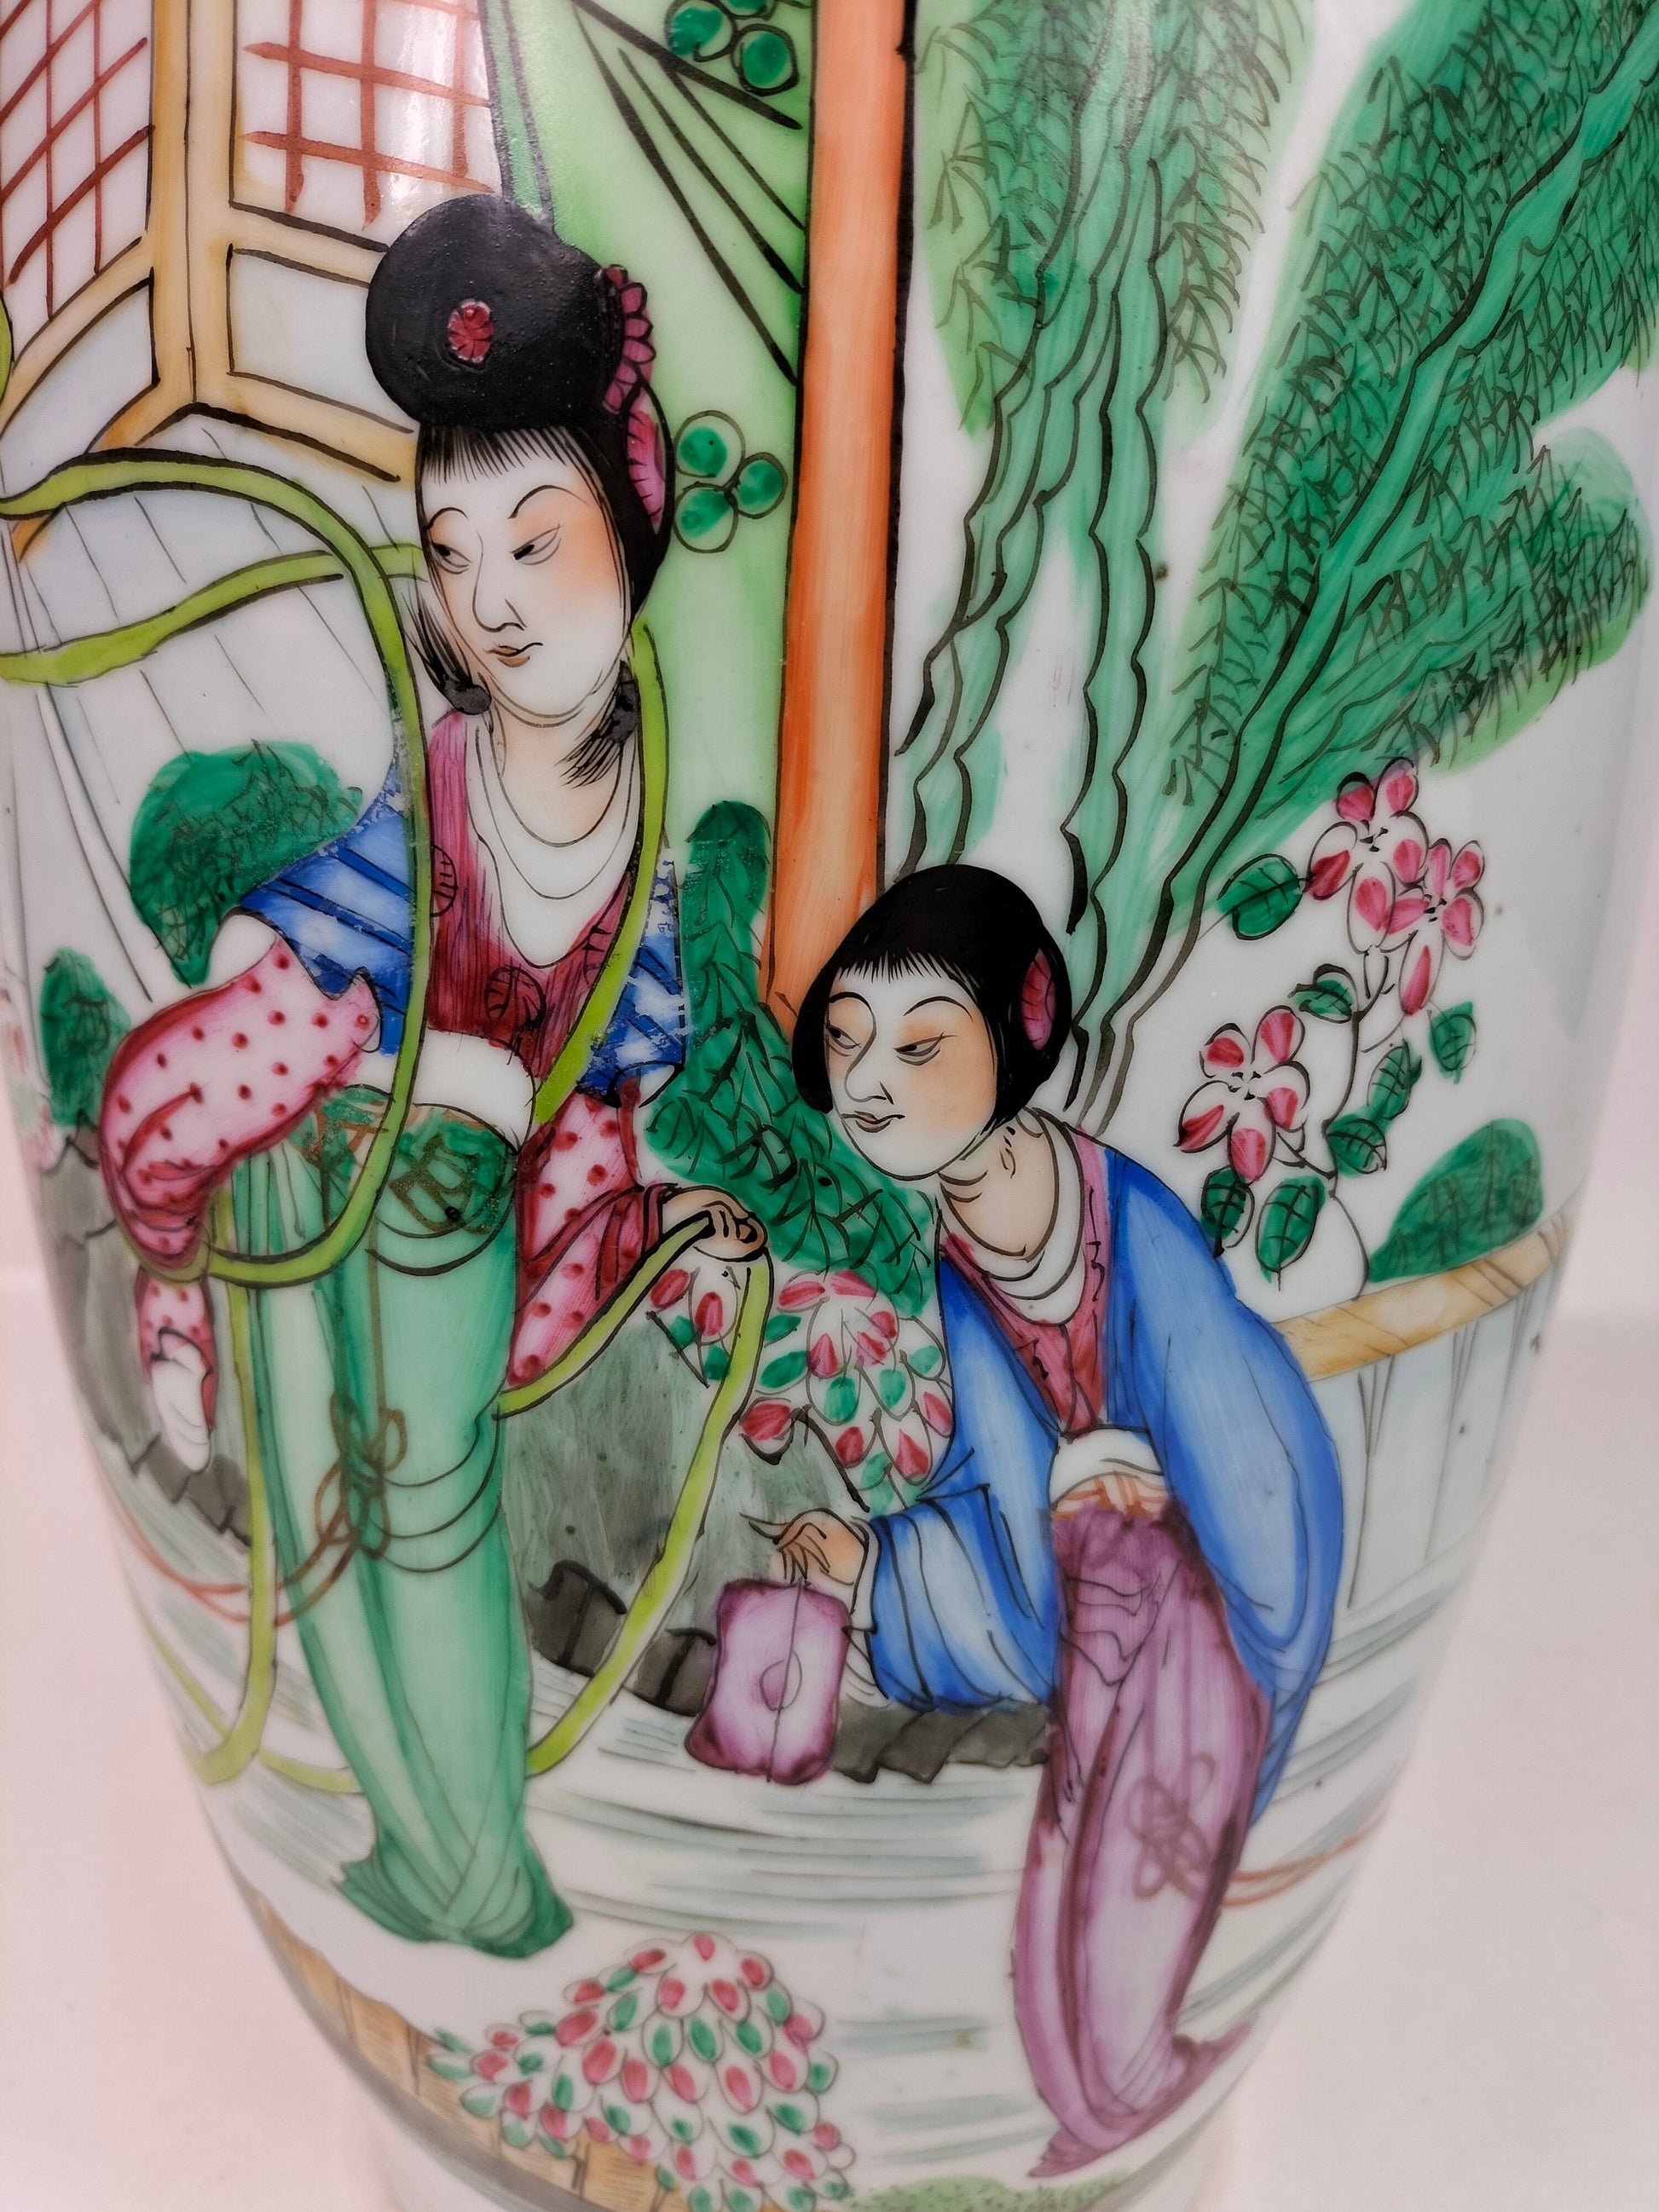 Vaisselle chinoise – Diddenantiques